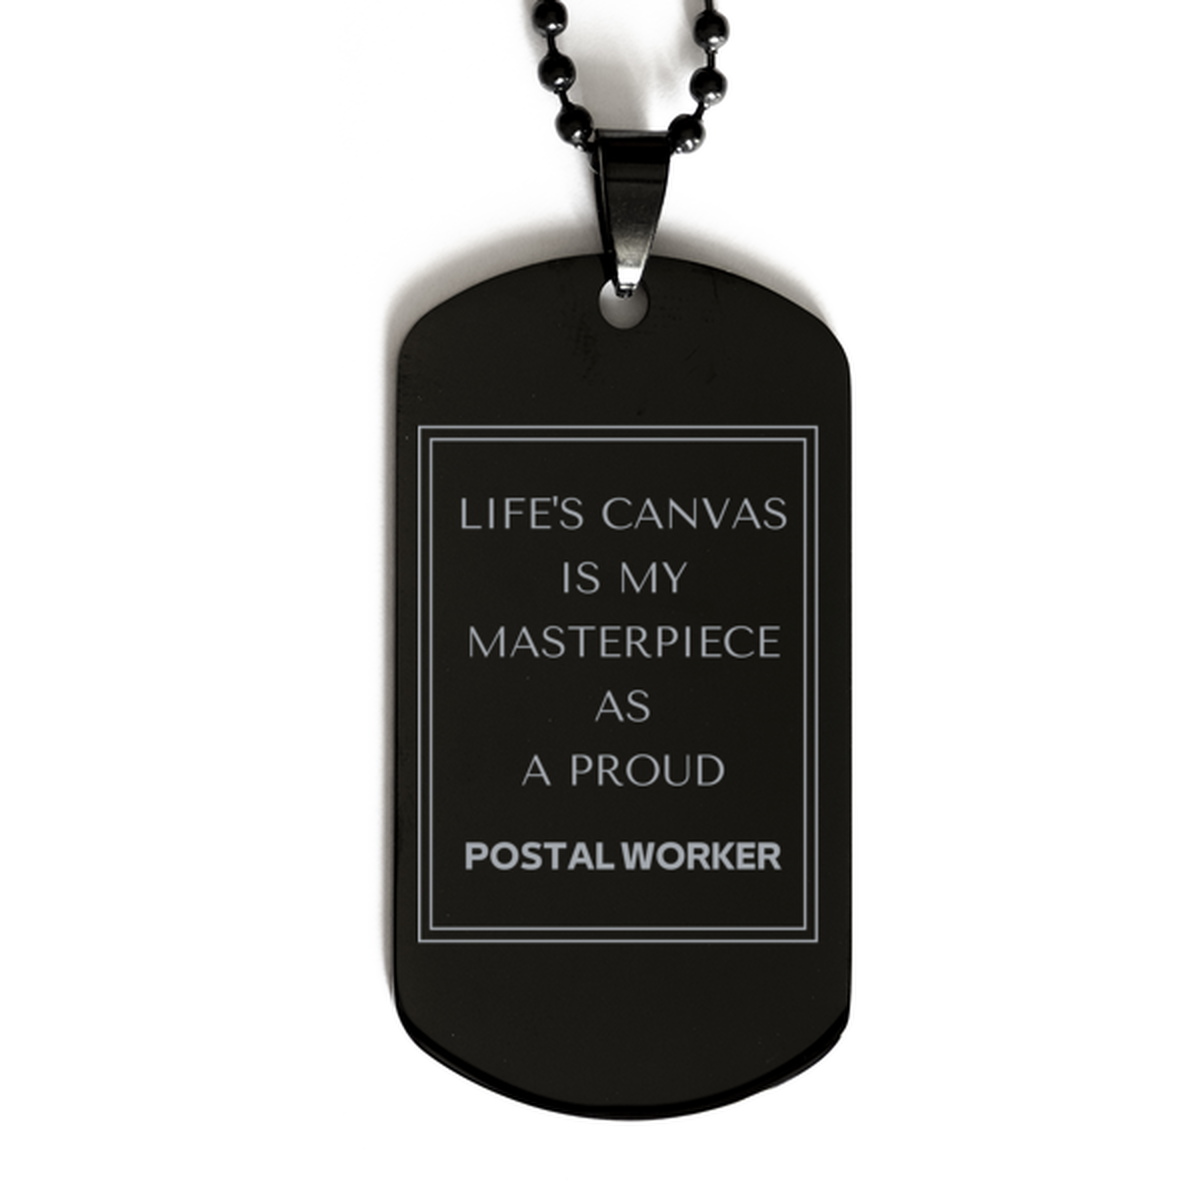 Proud Postal Worker Gifts, Life's canvas is my masterpiece, Epic Birthday Christmas Unique Black Dog Tag For Postal Worker, Coworkers, Men, Women, Friends